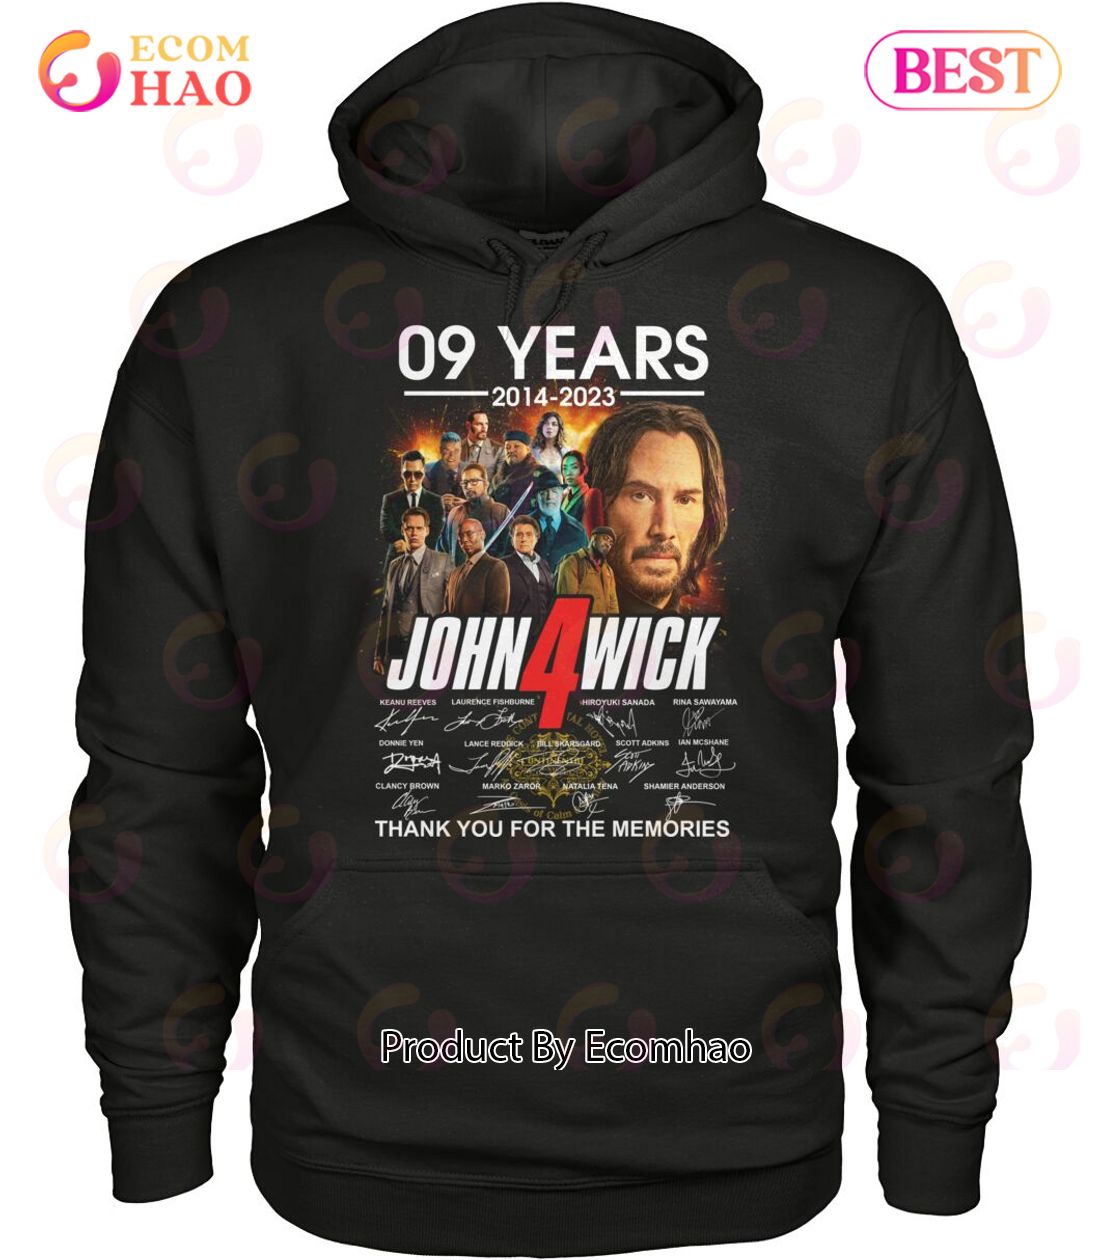 09 Years Of 2014 - 2023 John Wick Thank You For The Memories T-Shirt -  Ecomhao Store